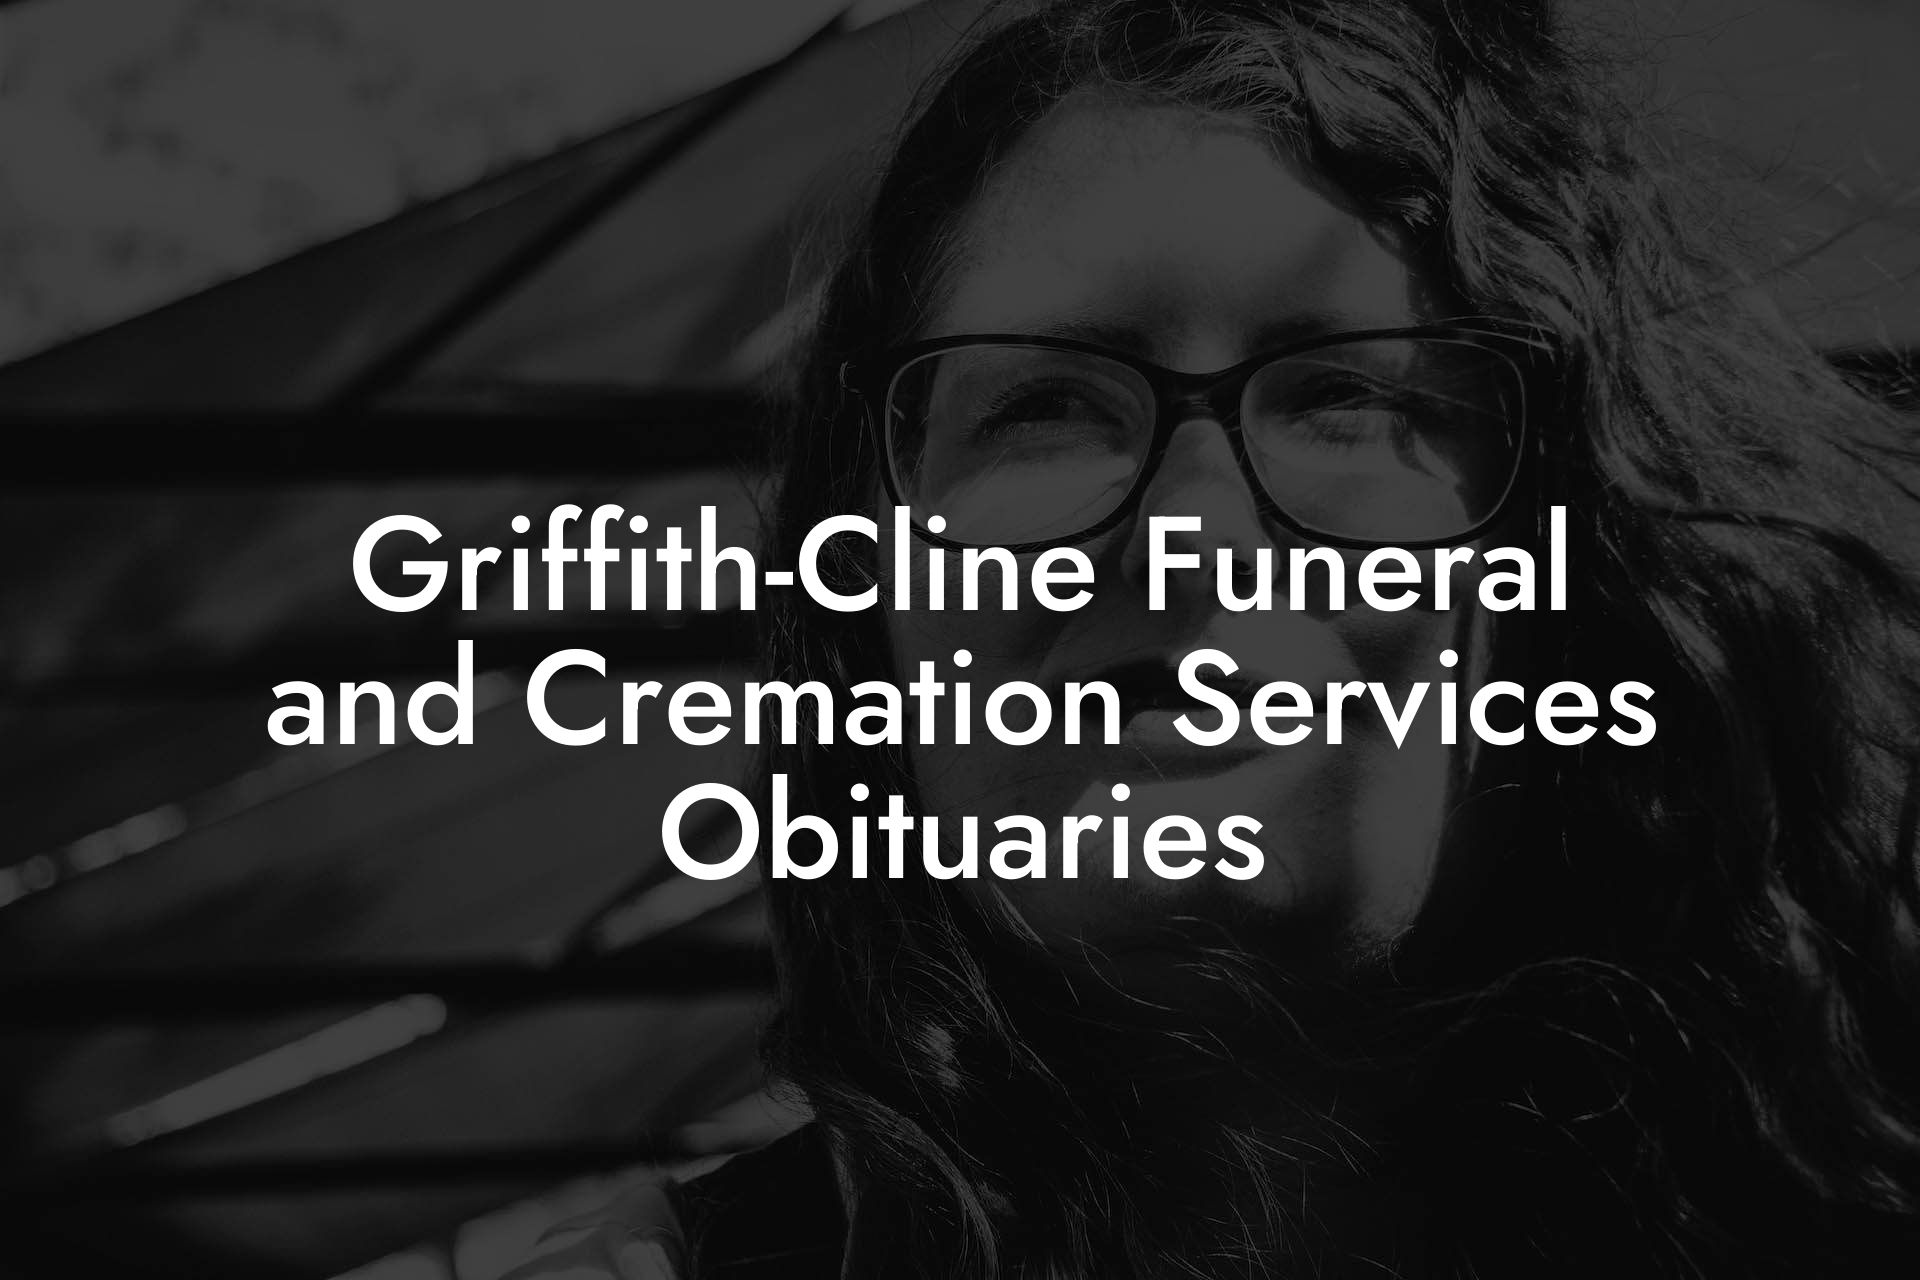 Griffith-Cline Funeral and Cremation Services Obituaries